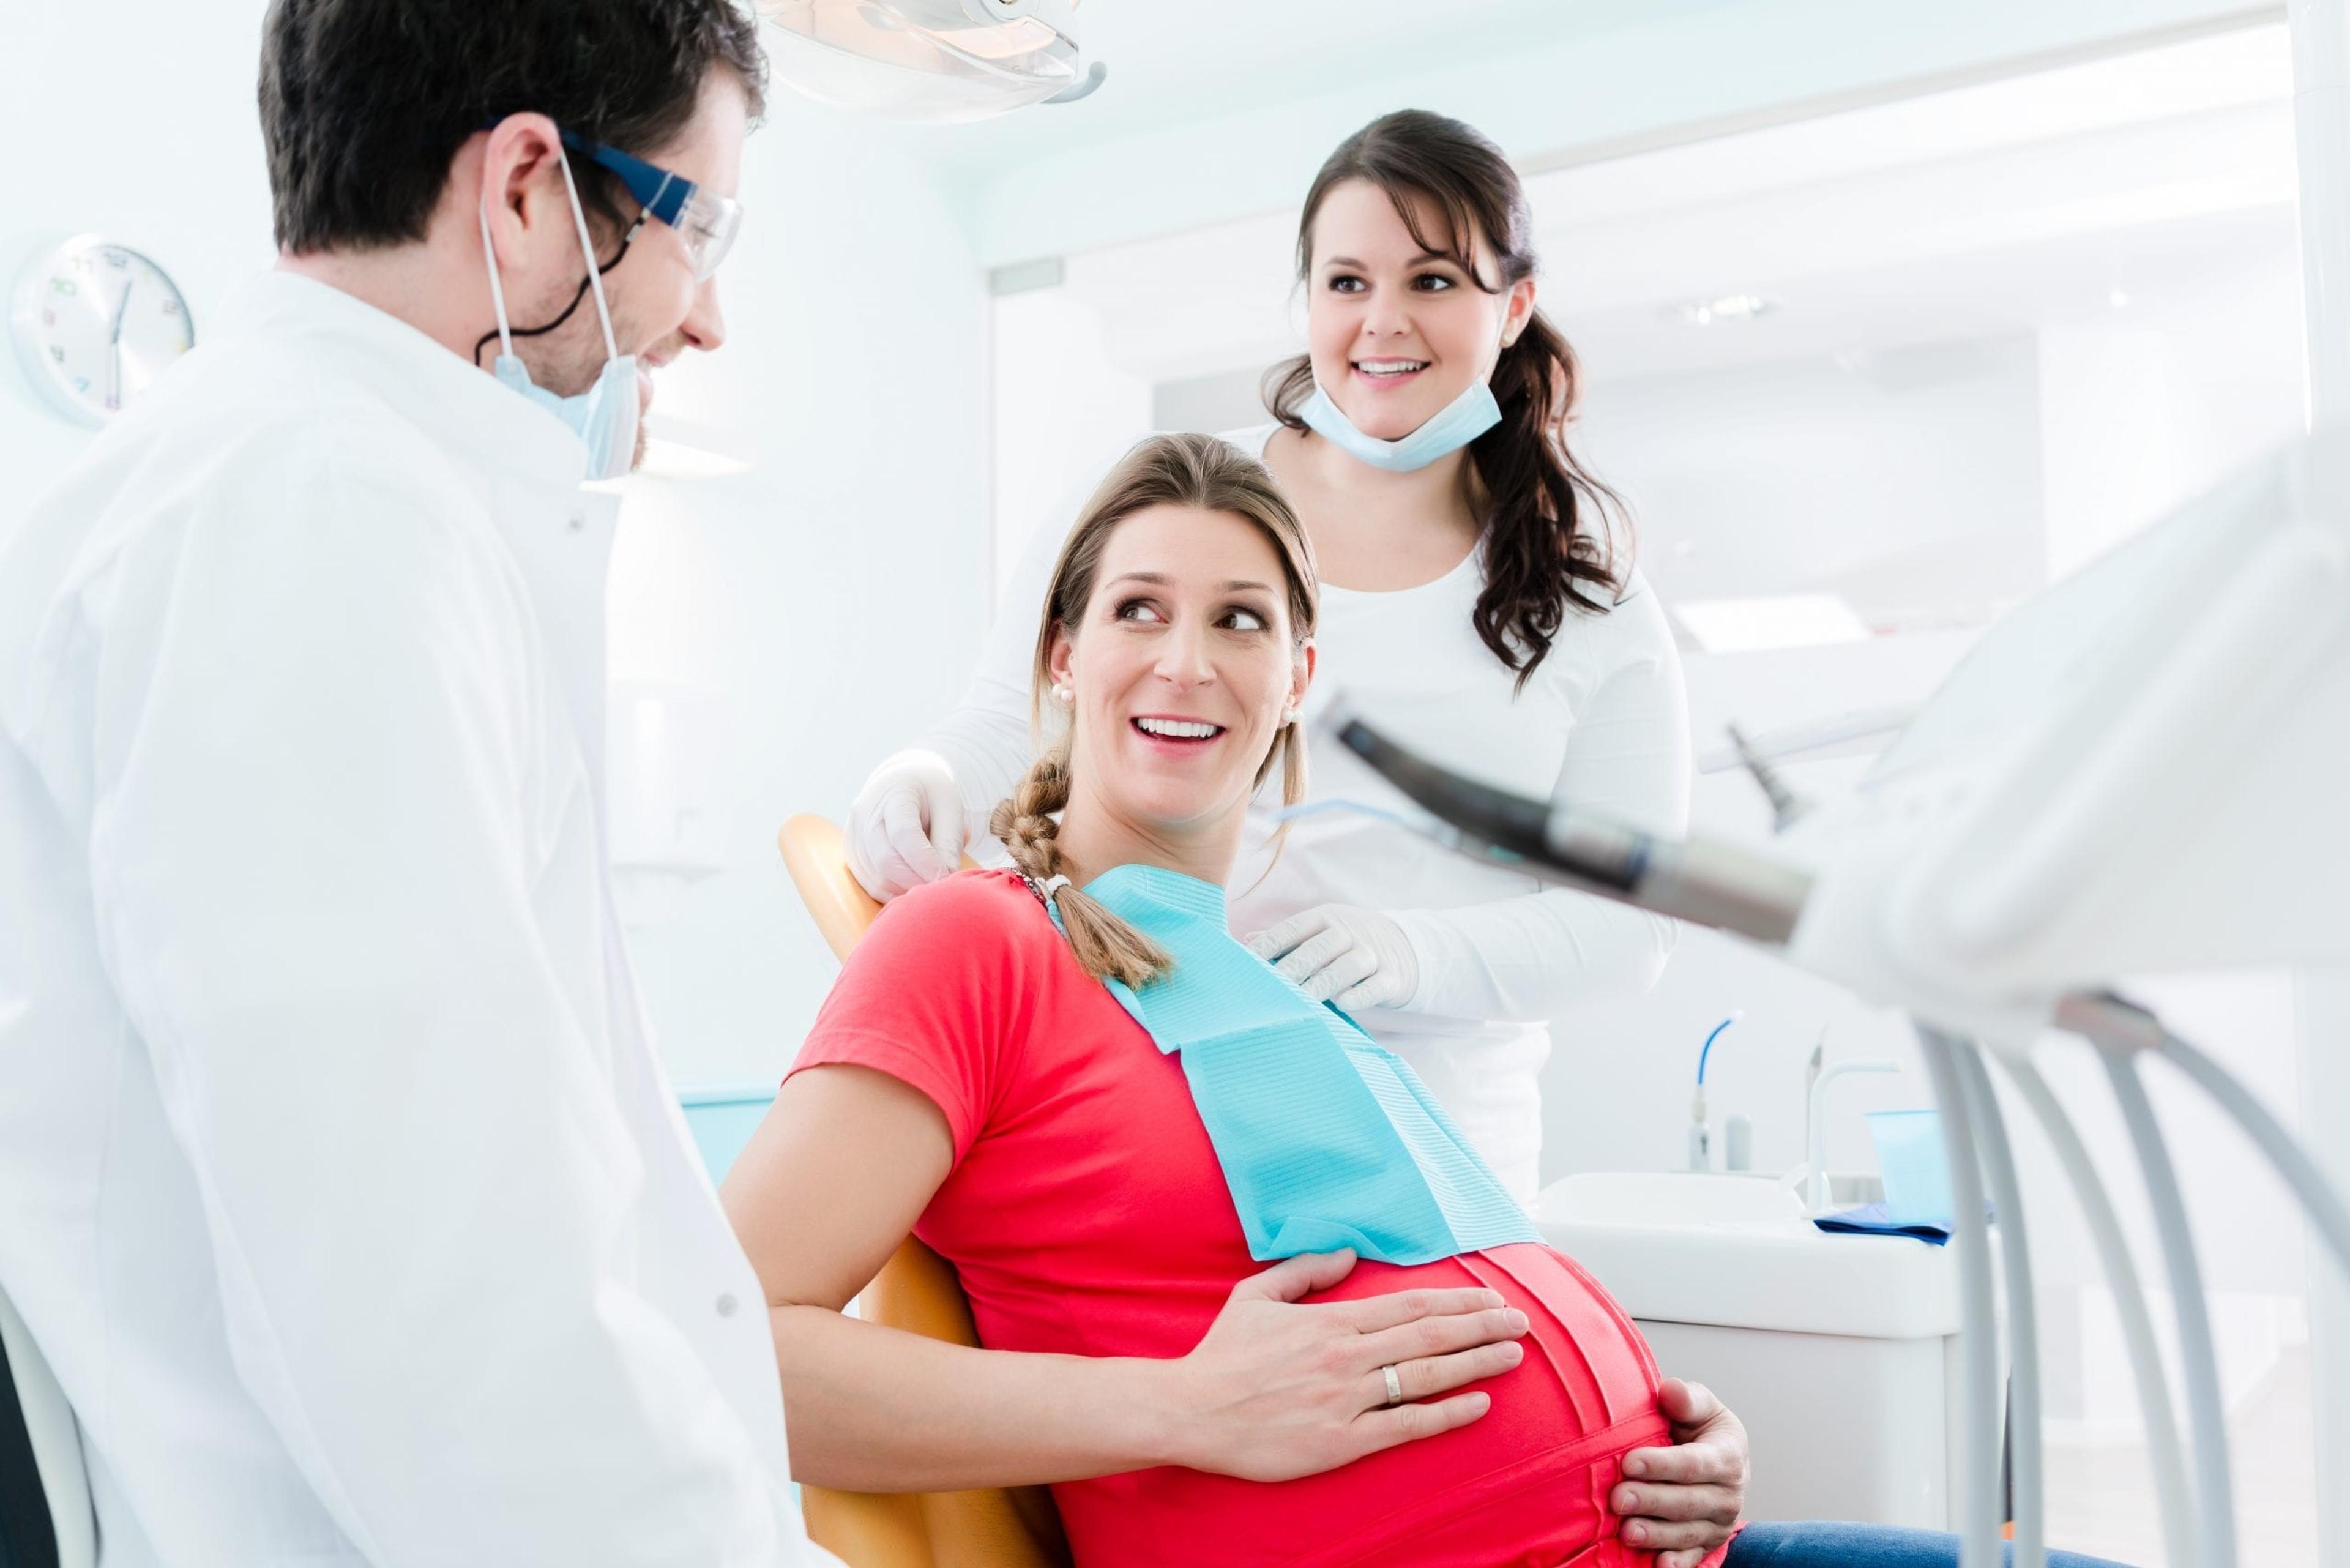 Pregnant woman at a dentist appointment